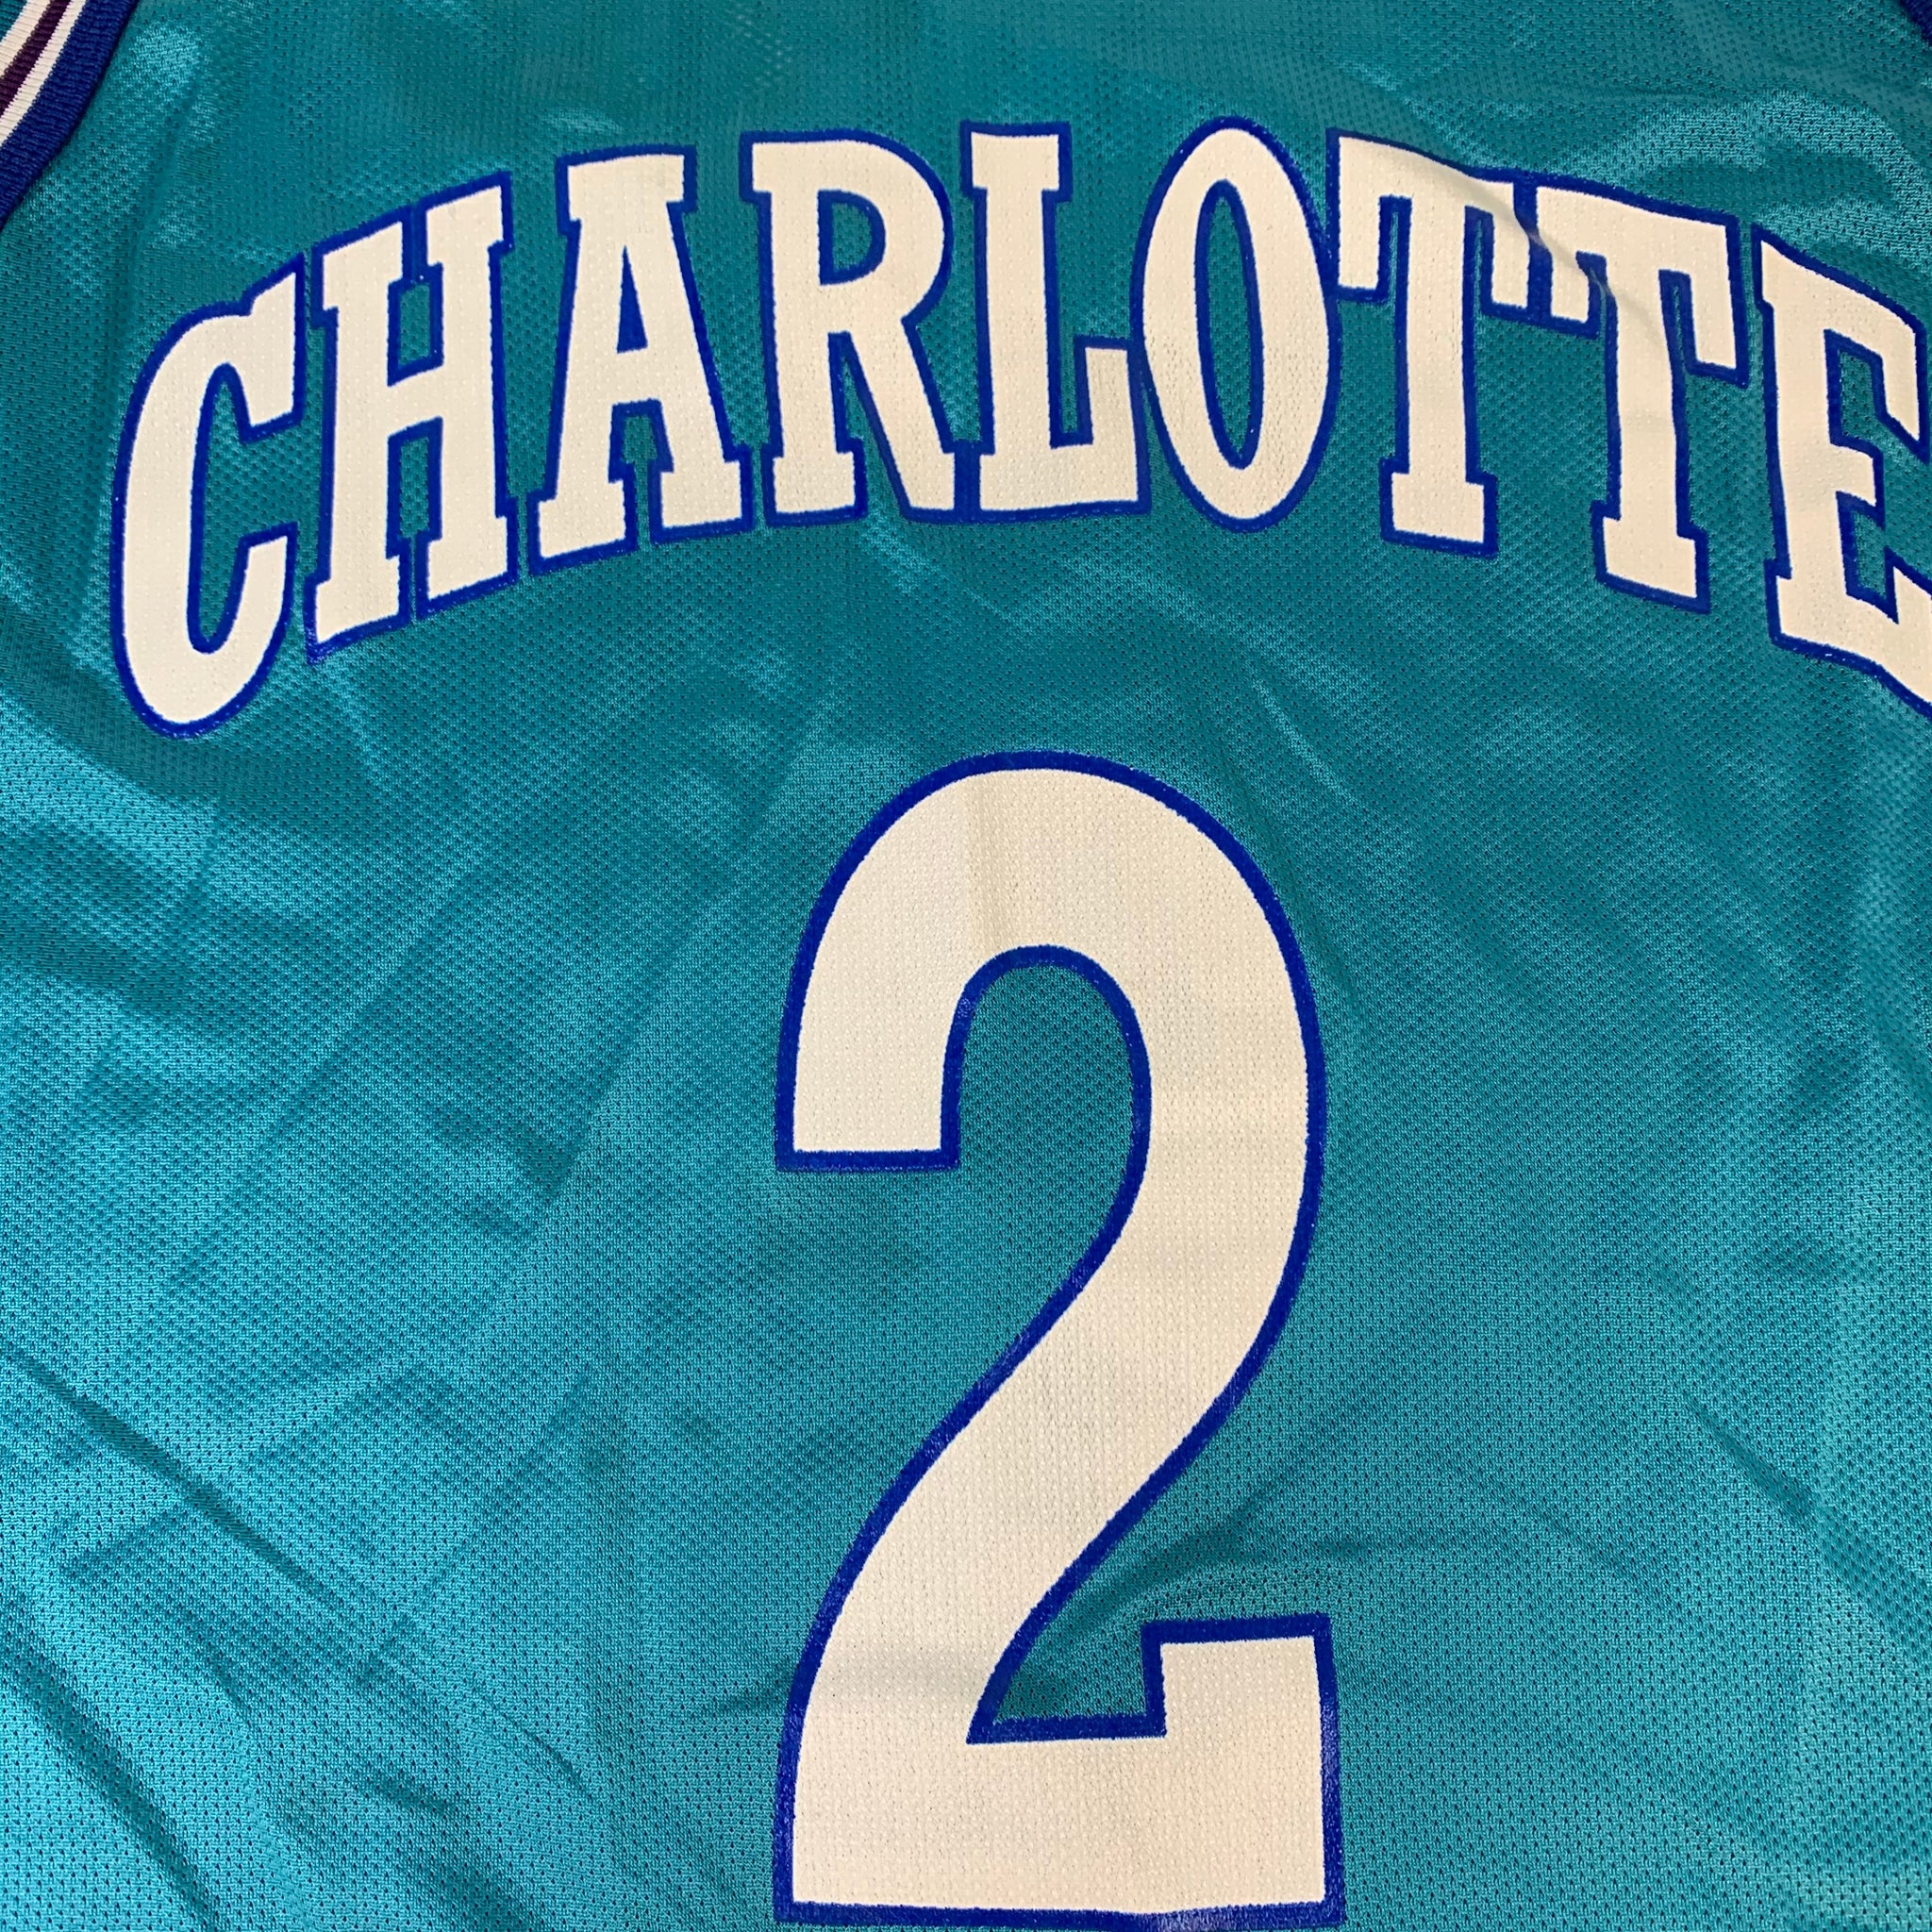 The new Charlotte Hornets jerseys are retro, teal and fantastic